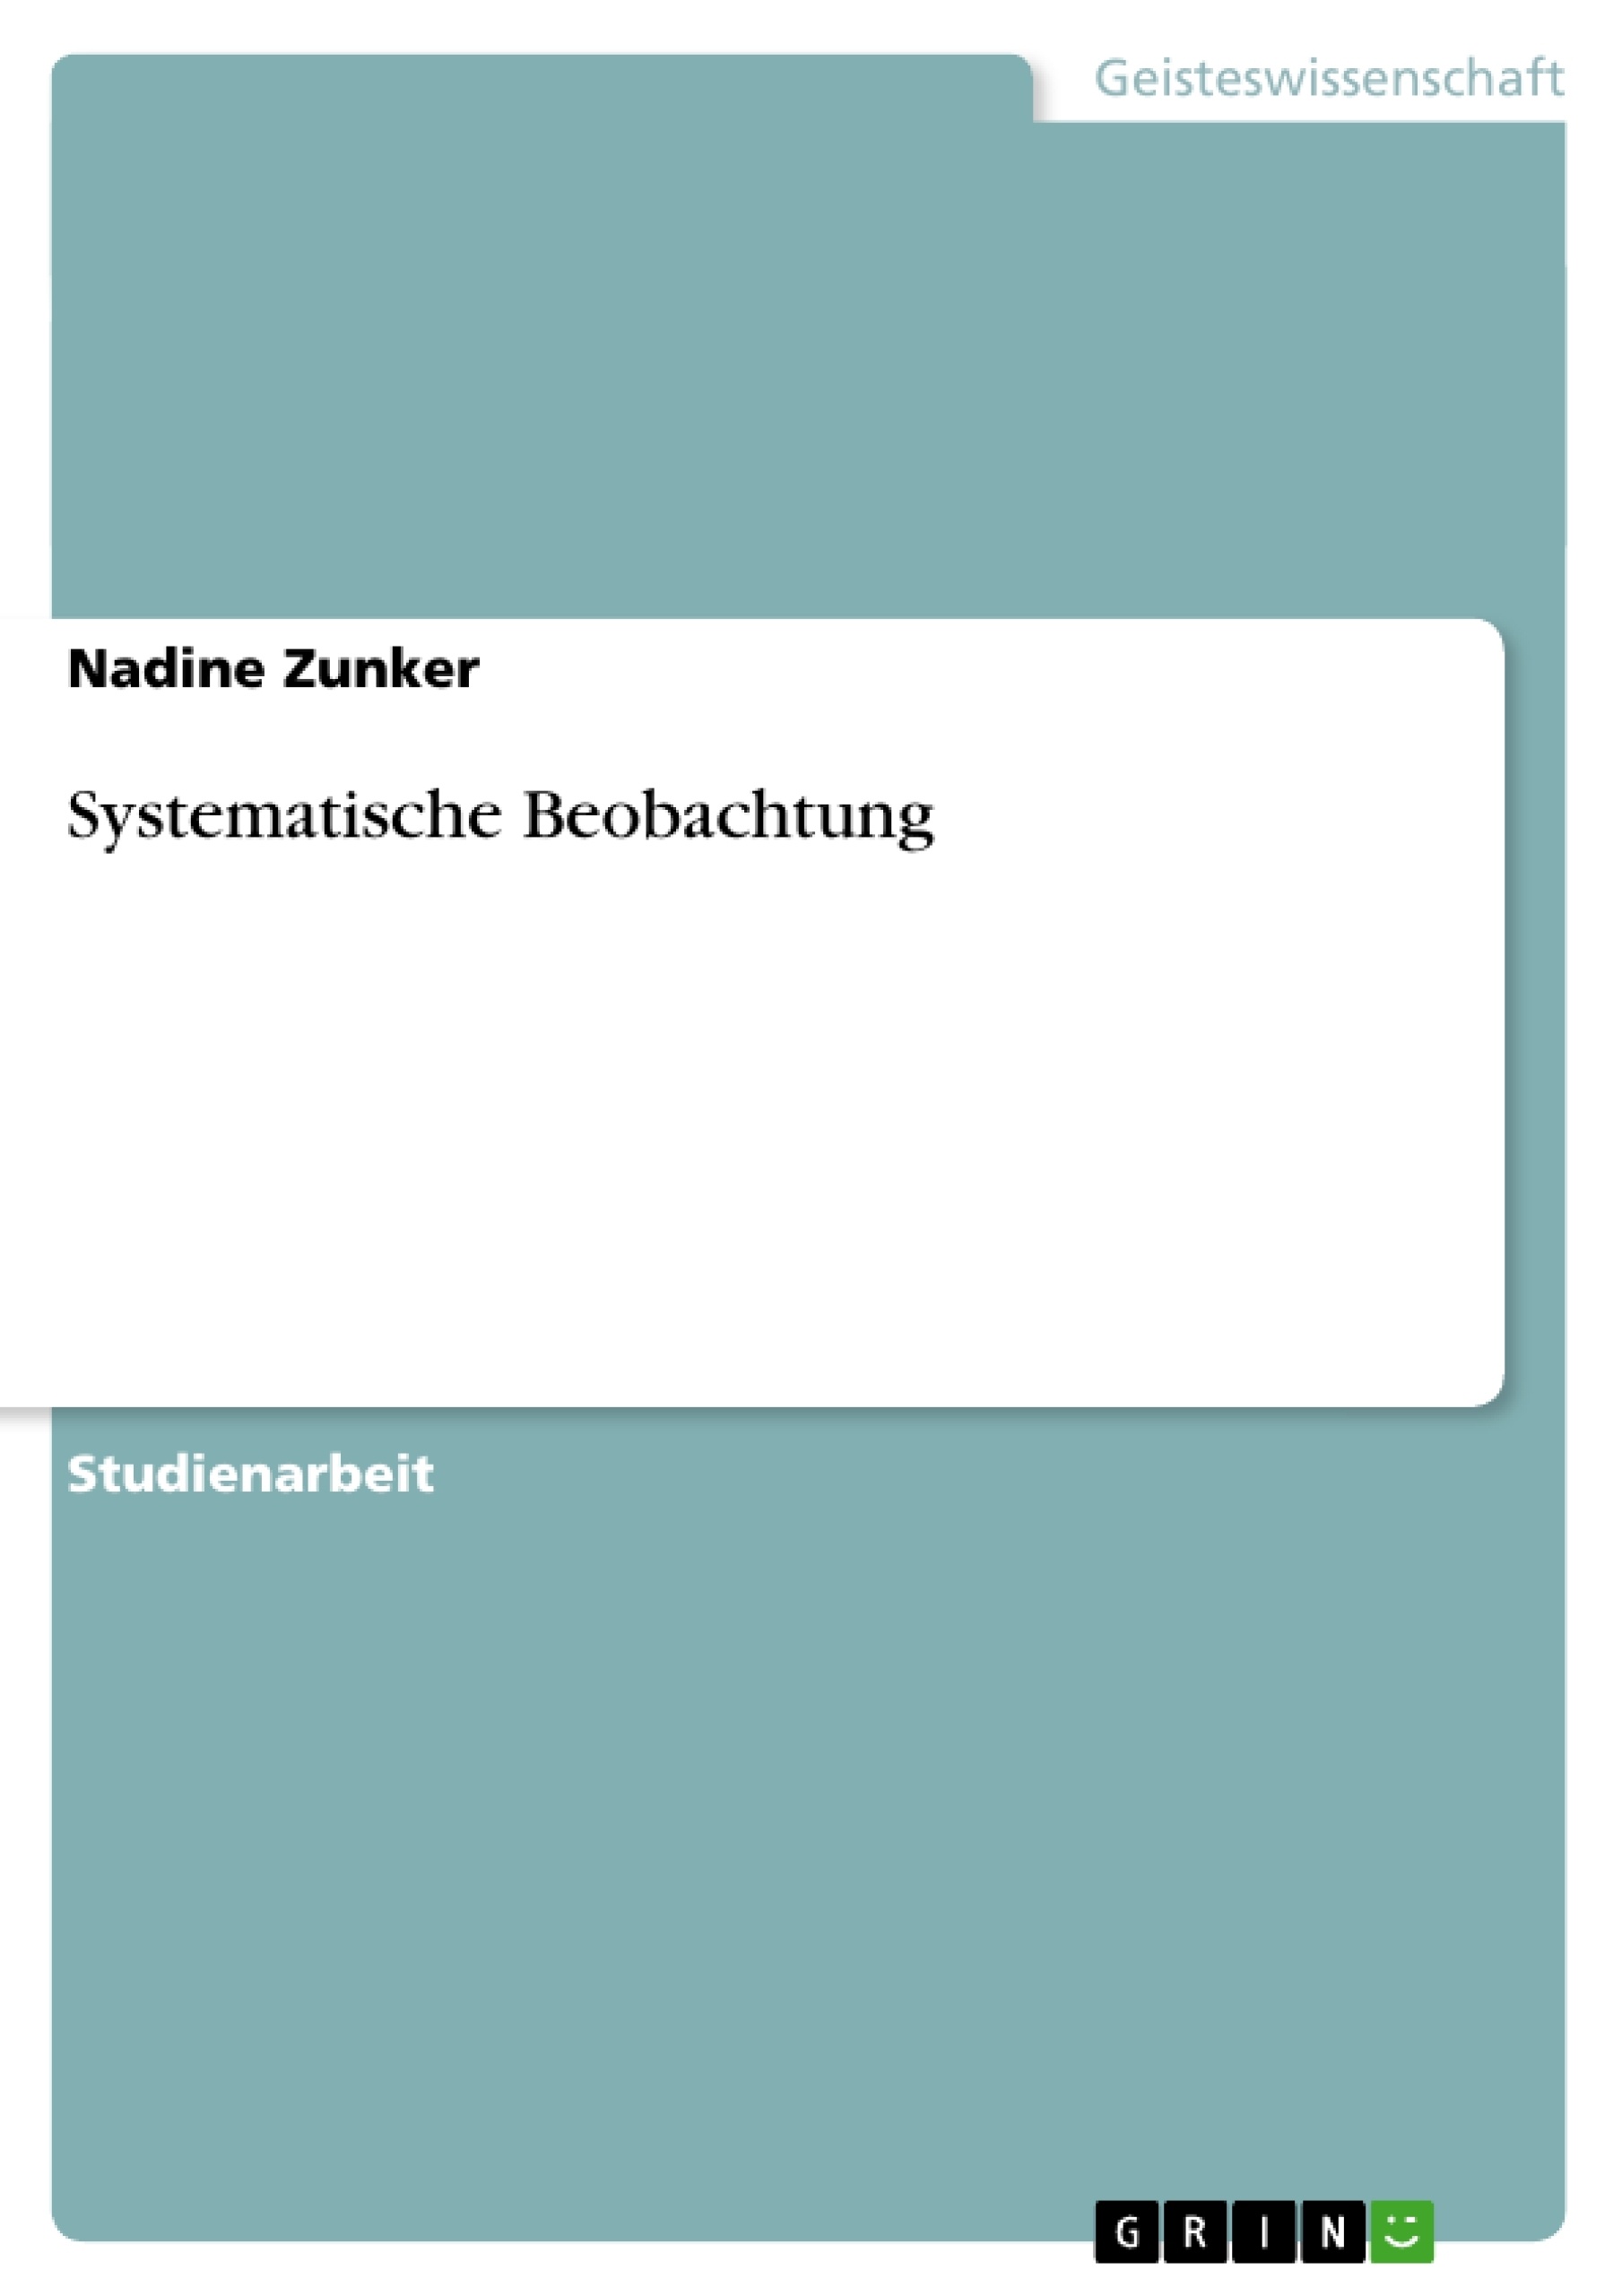 Título: Systematische Beobachtung